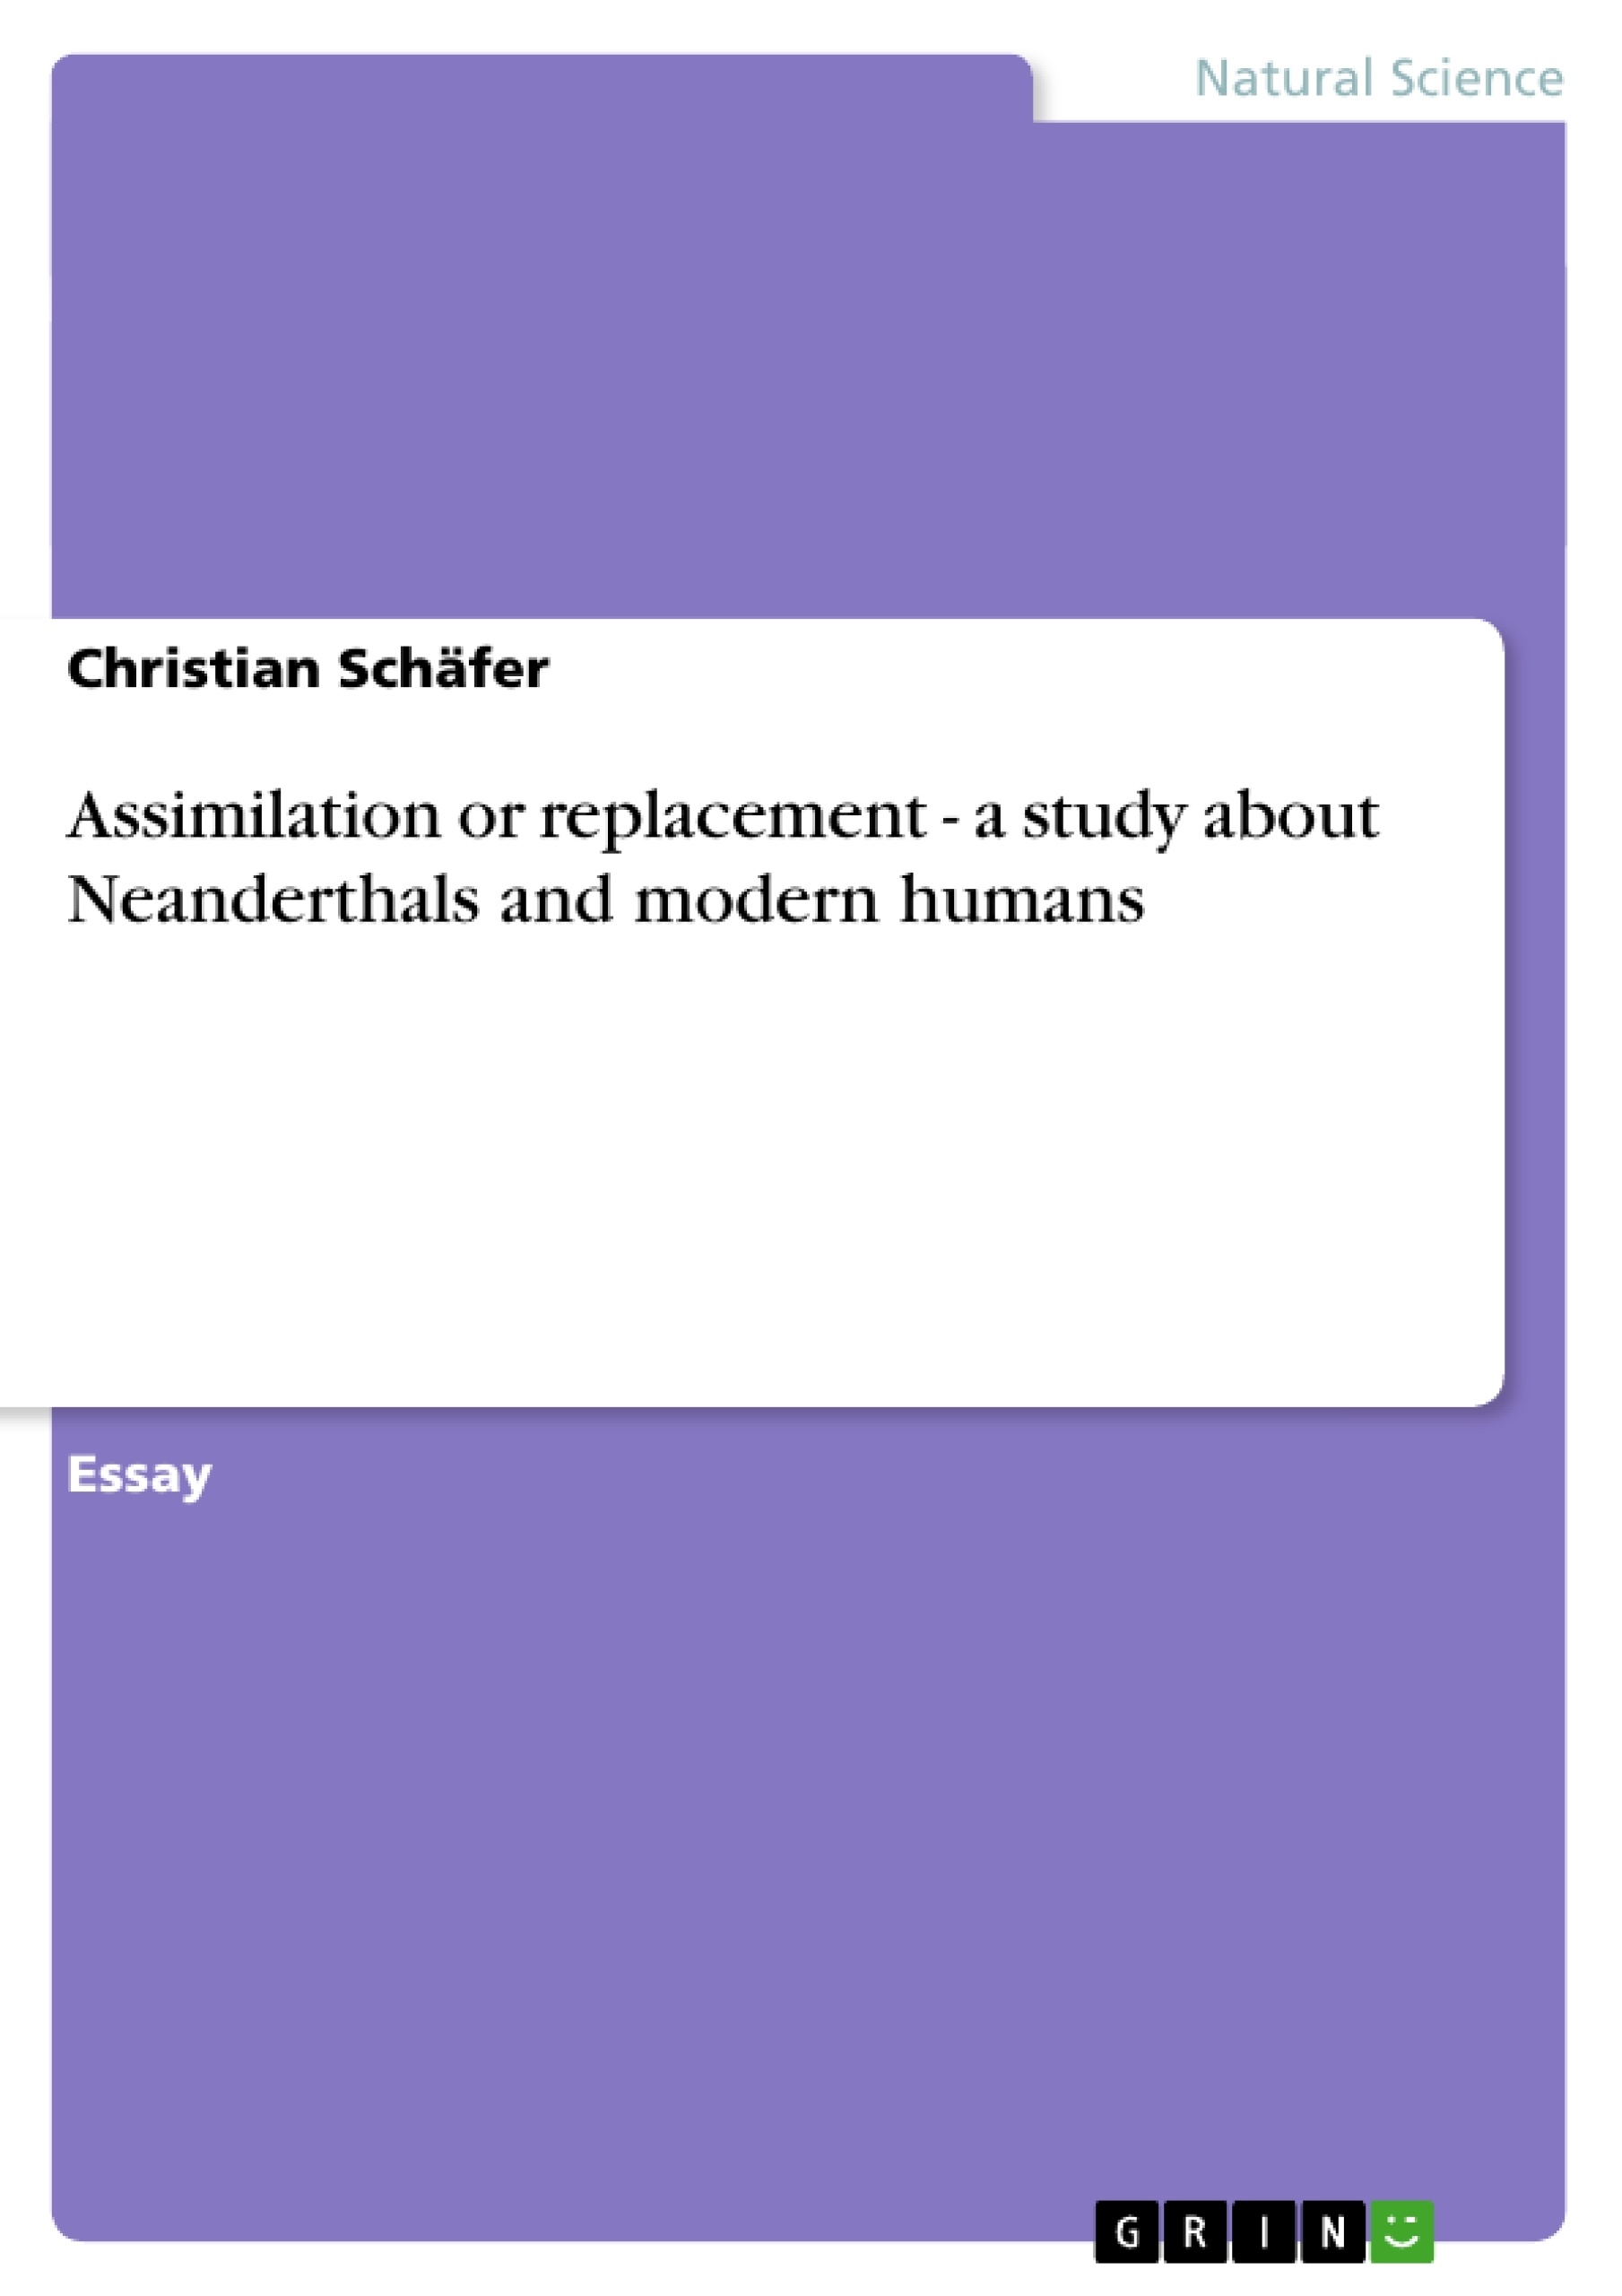 Titre: Assimilation or replacement - a study about Neanderthals and modern humans